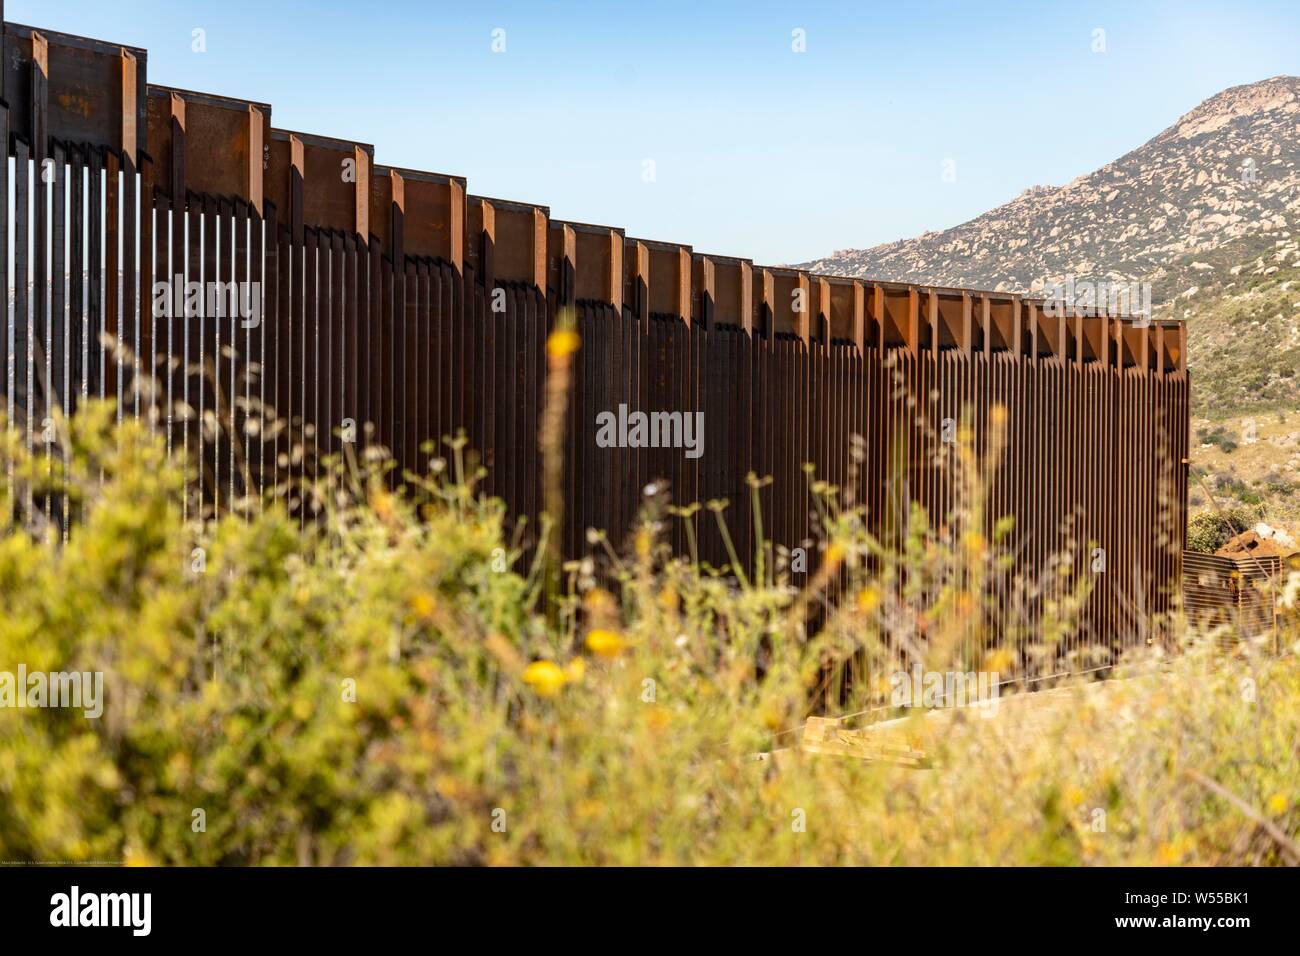 A section of replacement border wall along the southern border with Mexico June 19, 2019 near Tecate, California. The replacement was authorized under the Obama administration and is in the process of being completed. Stock Photo